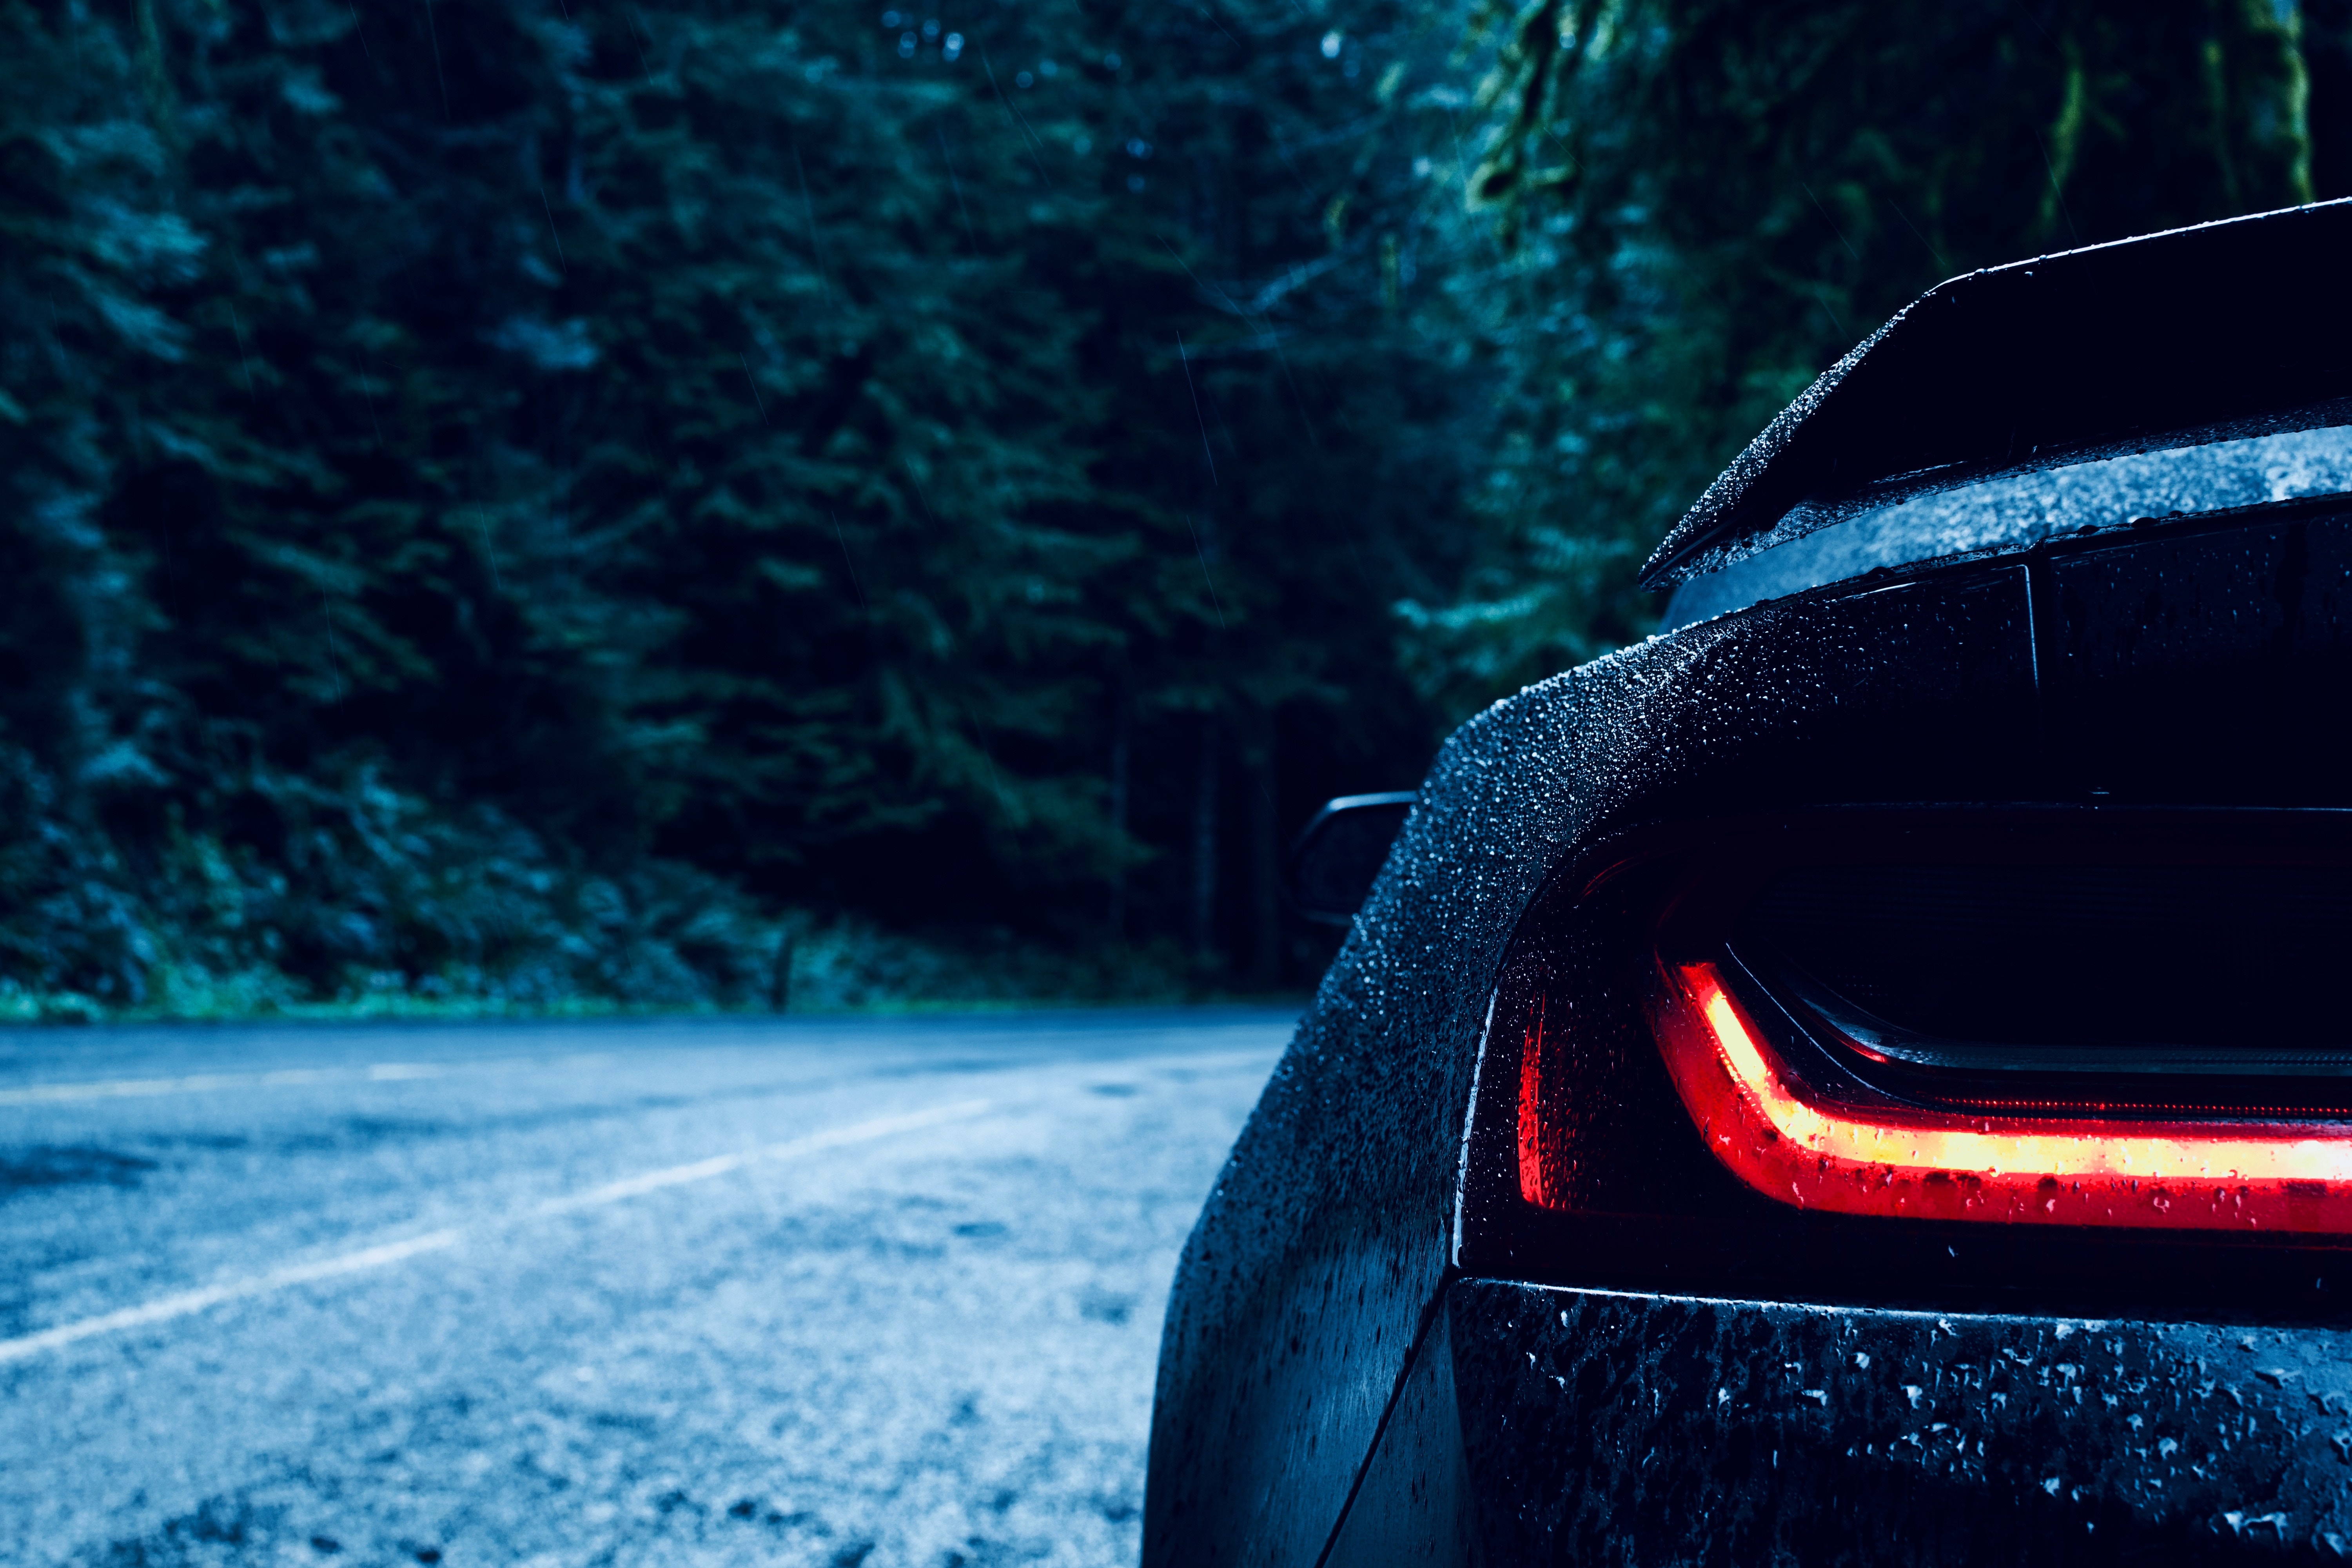 61862 download wallpaper auto, drops, cars, blur, smooth, headlight screensavers and pictures for free